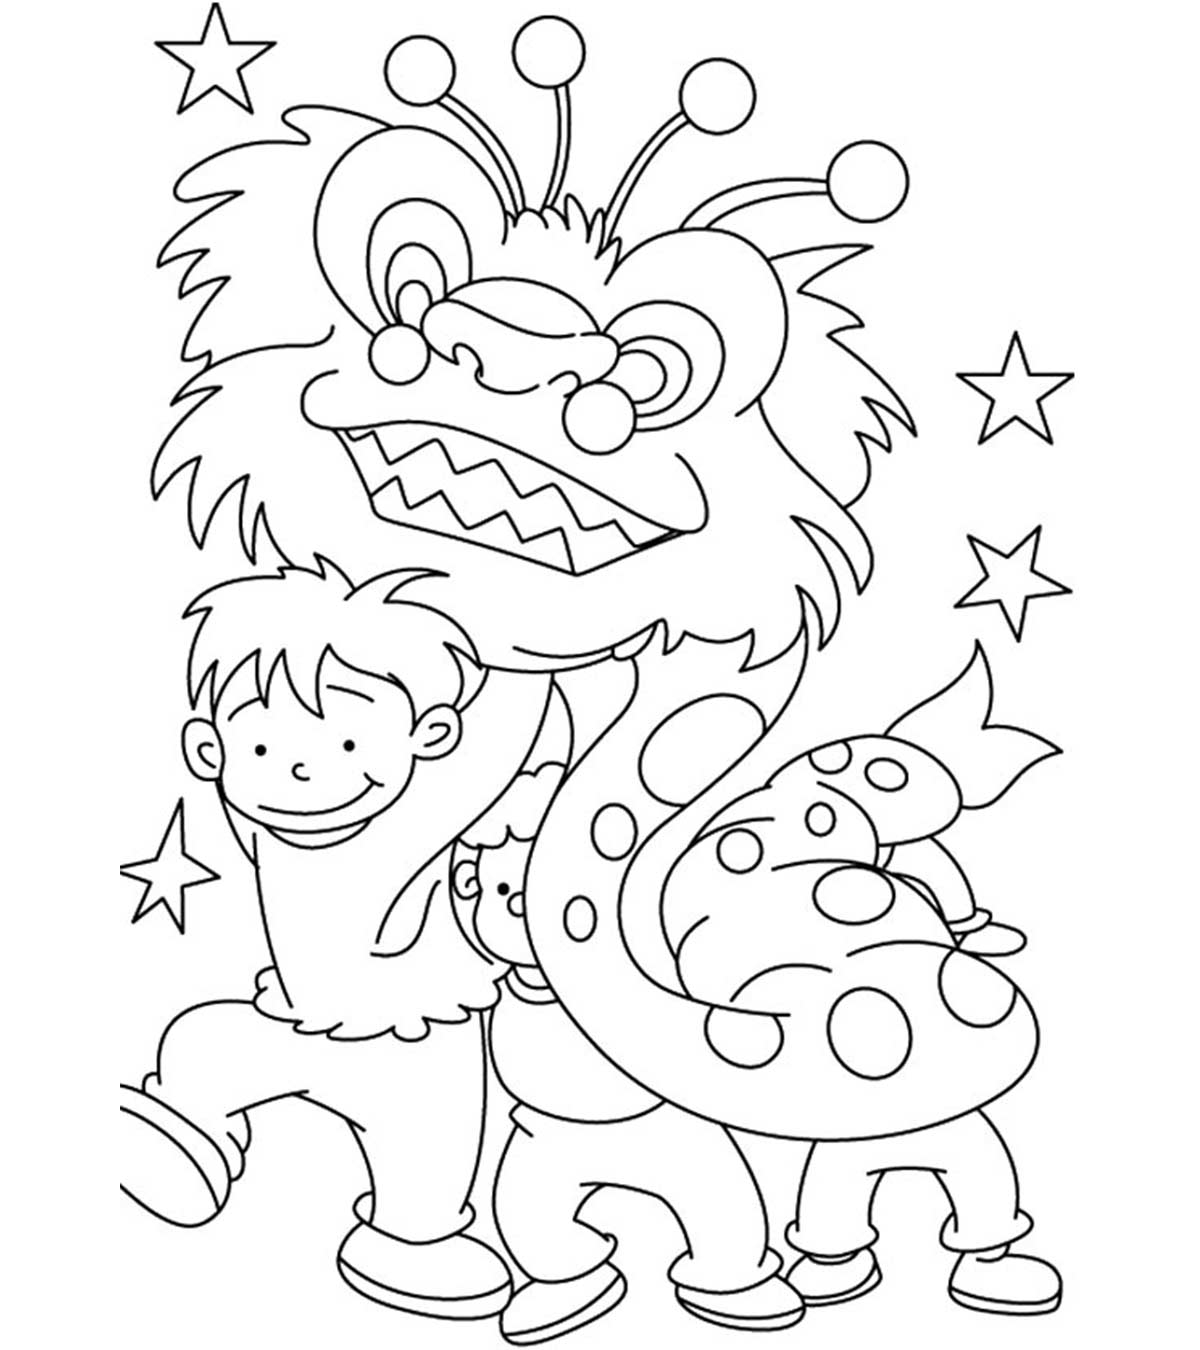 Coloring Book : Top Chinese New Year Coloring Pages For ...